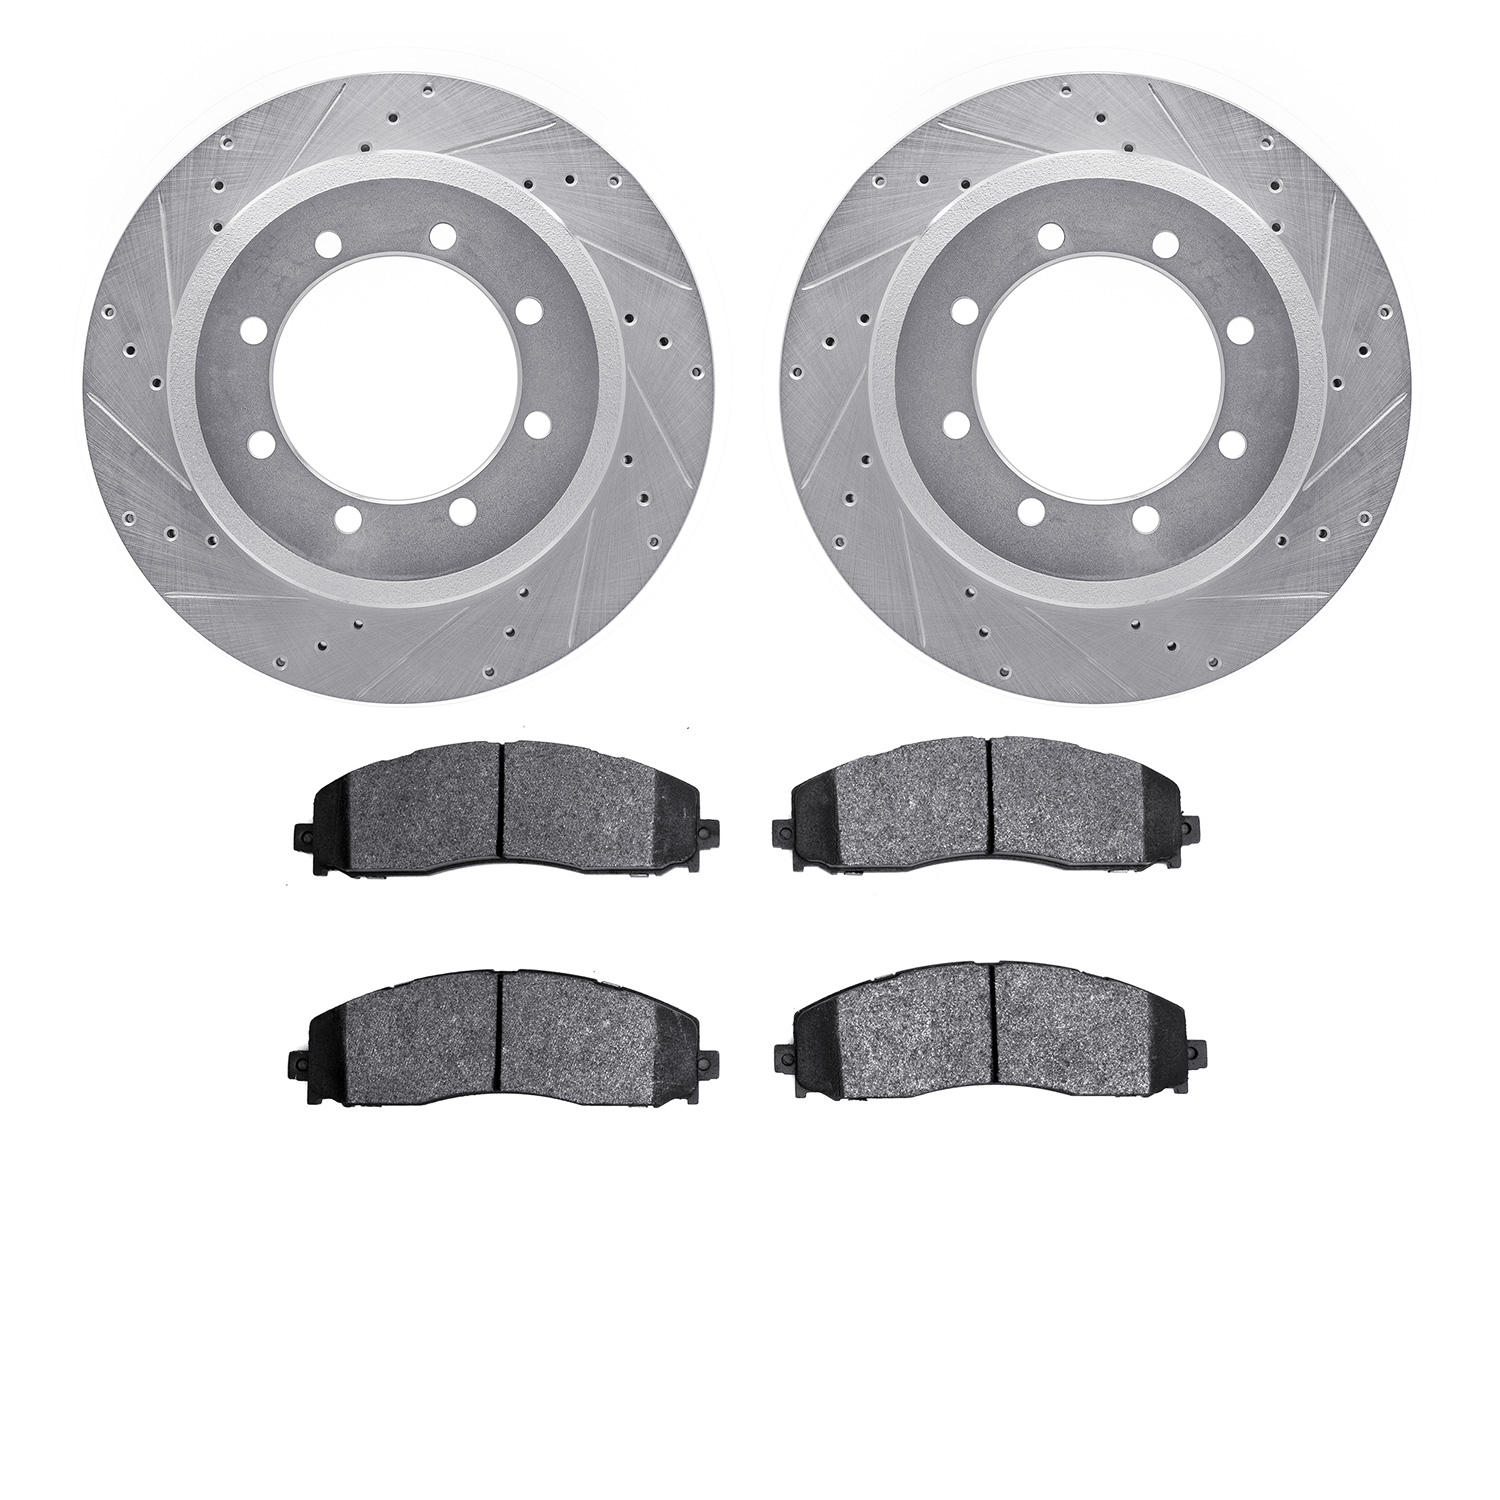 7402-54099 Drilled/Slotted Brake Rotors with Ultimate-Duty Brake Pads Kit [Silver], Fits Select Ford/Lincoln/Mercury/Mazda, Posi